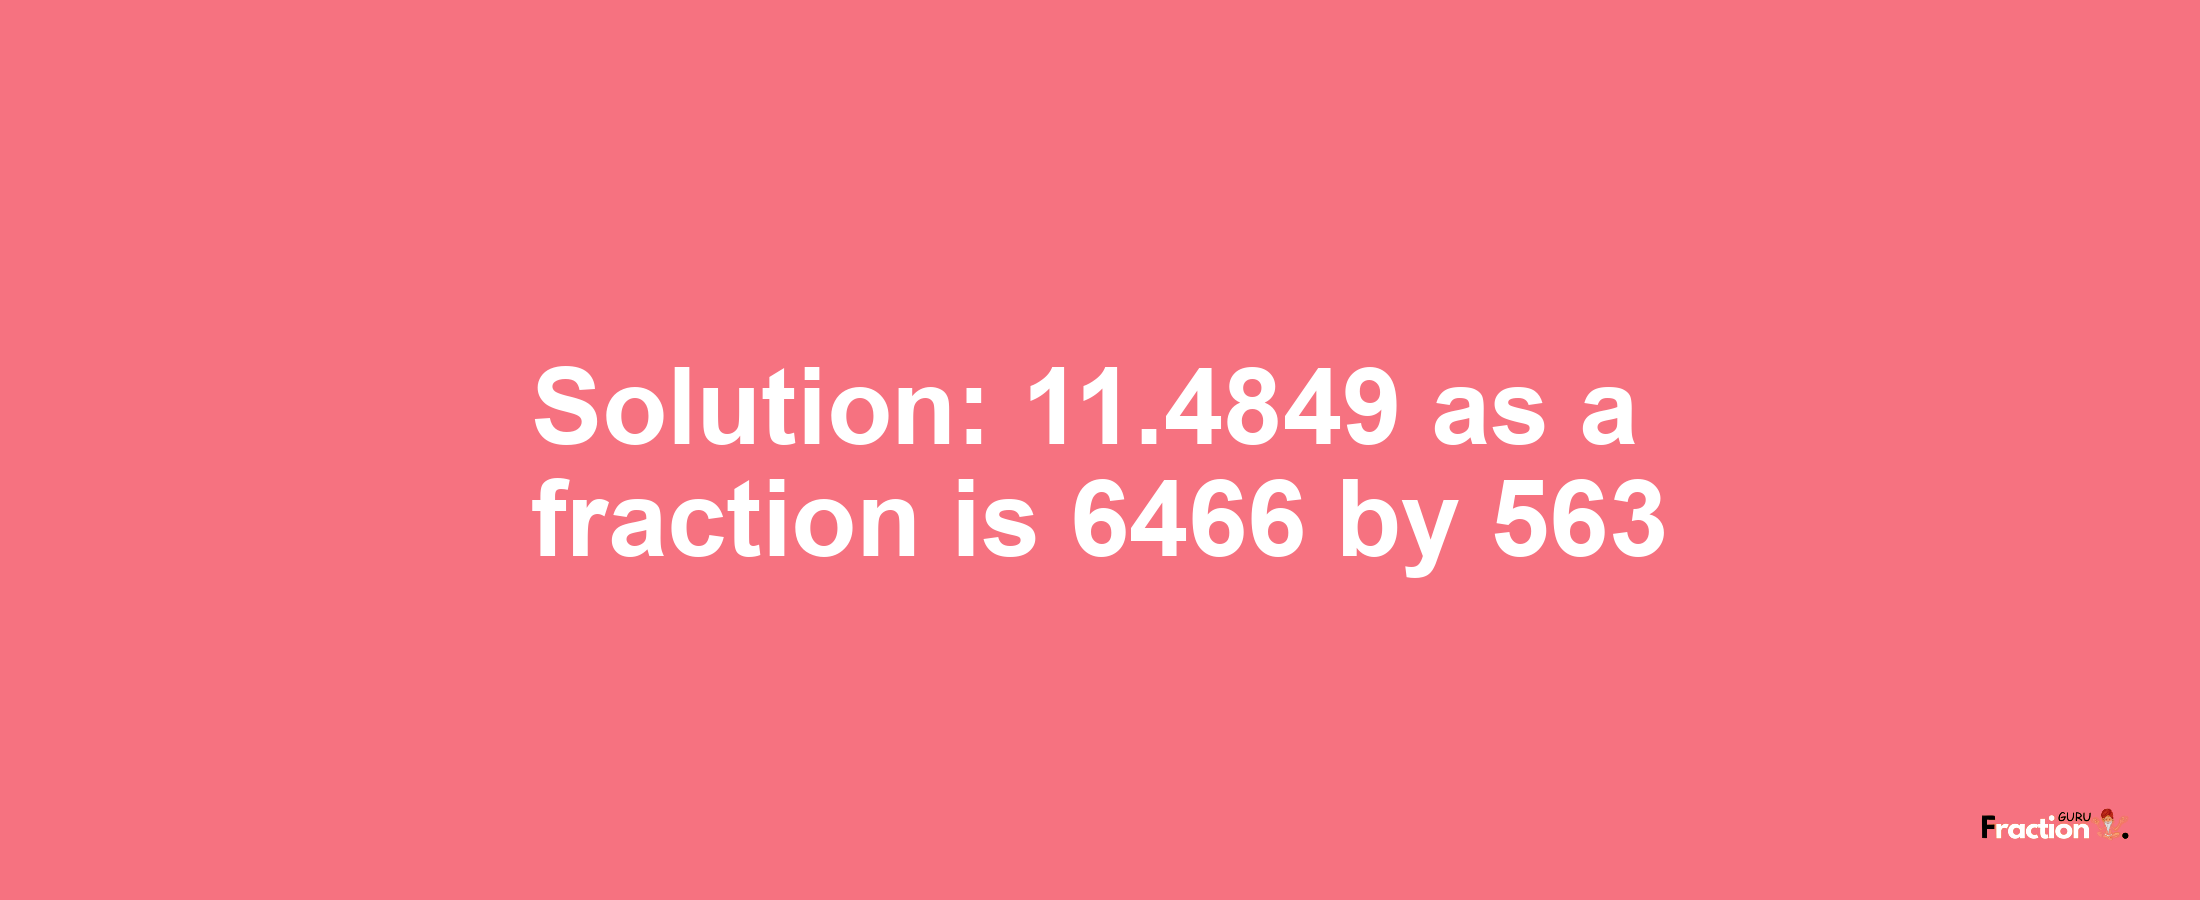 Solution:11.4849 as a fraction is 6466/563